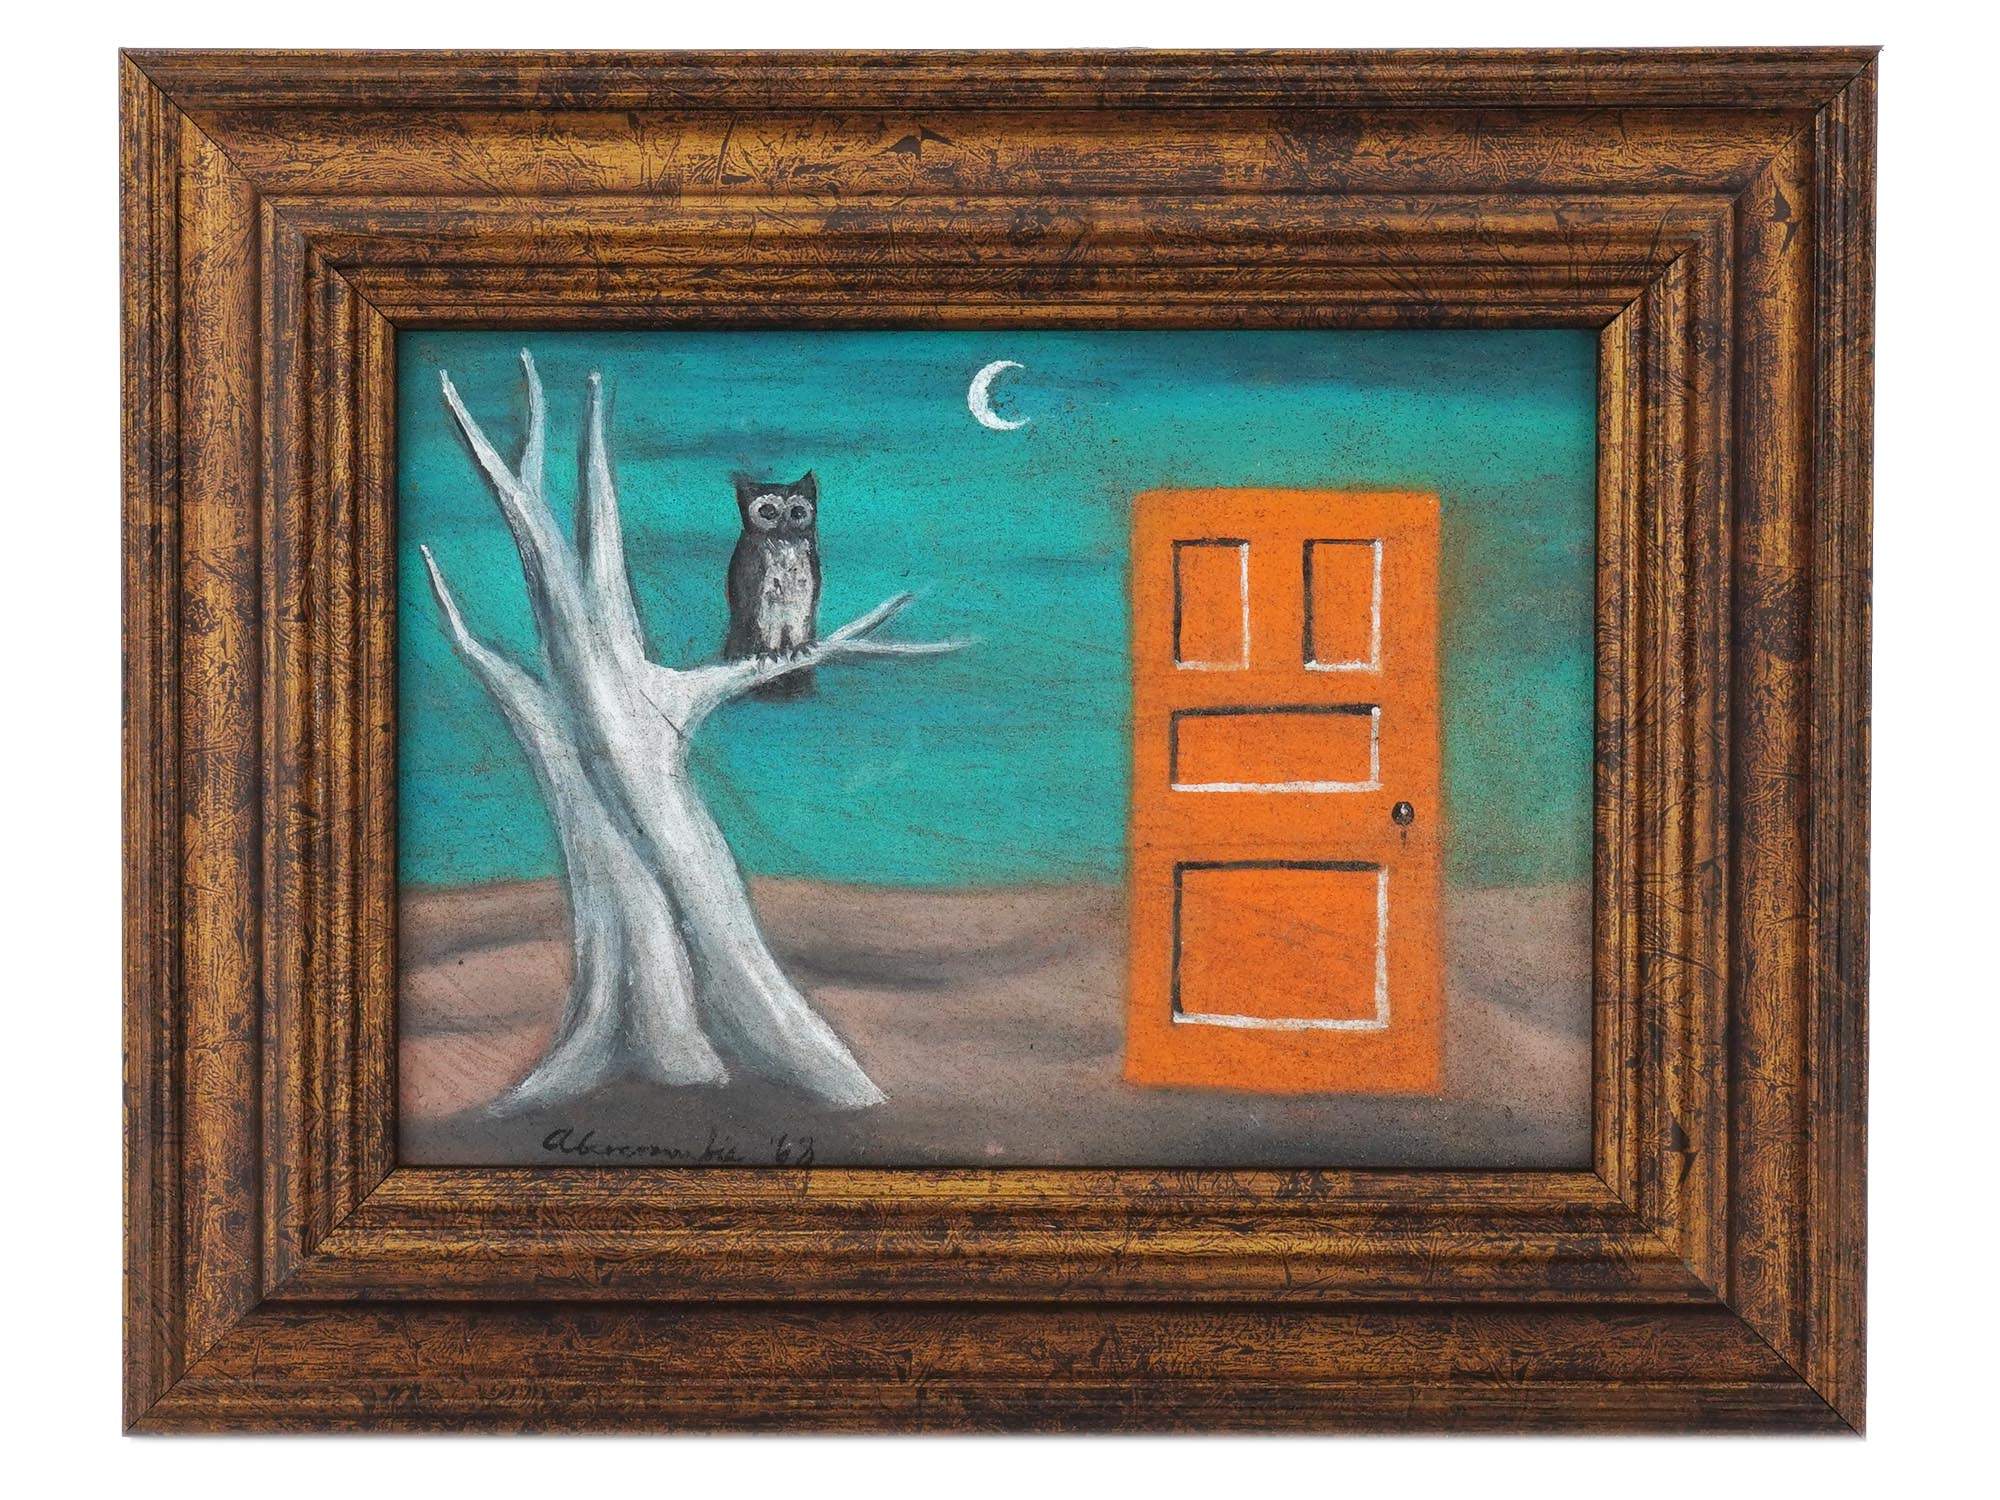 SURREAL AMERICAN OIL PAINTING BY GERTRUDE ABERCROMBIE PIC-0